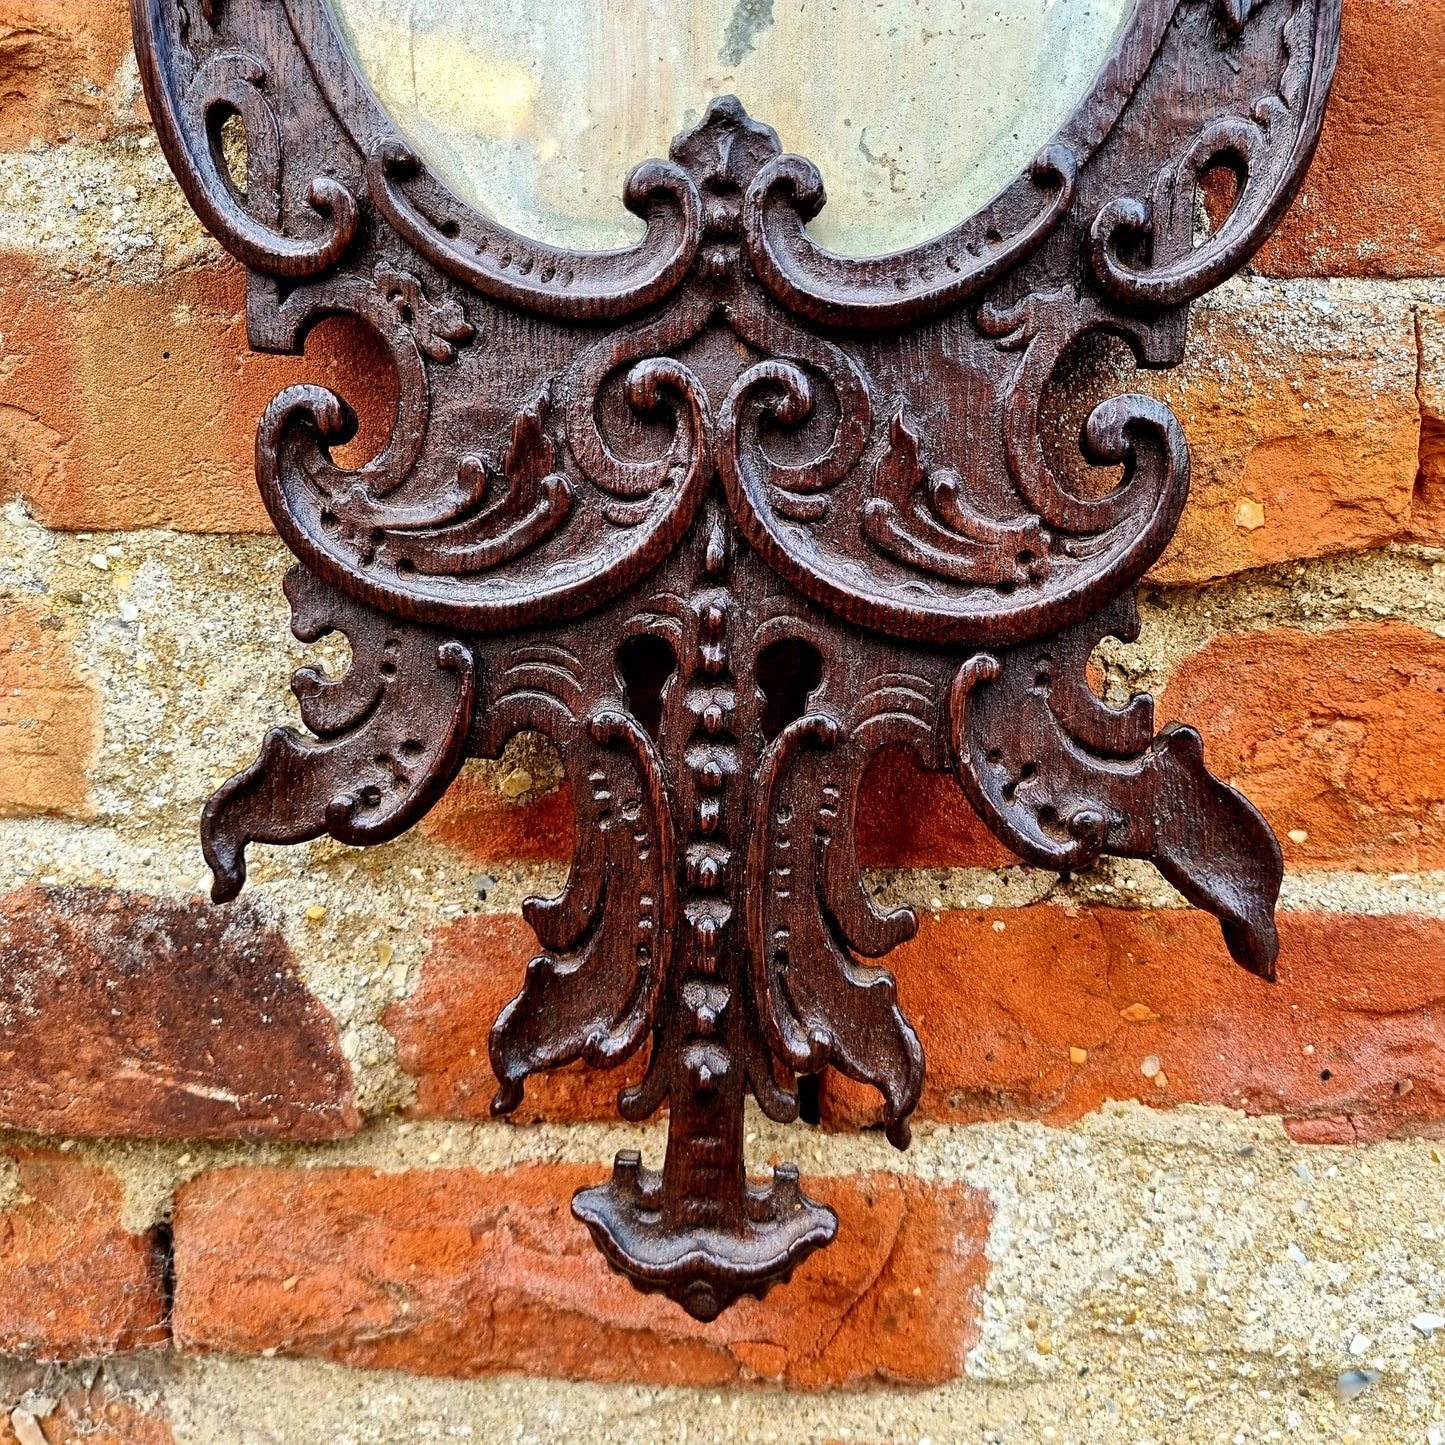 Early 18th Century German Antique Carved Oak Mirror Frame With Original Mercury Glass Plate